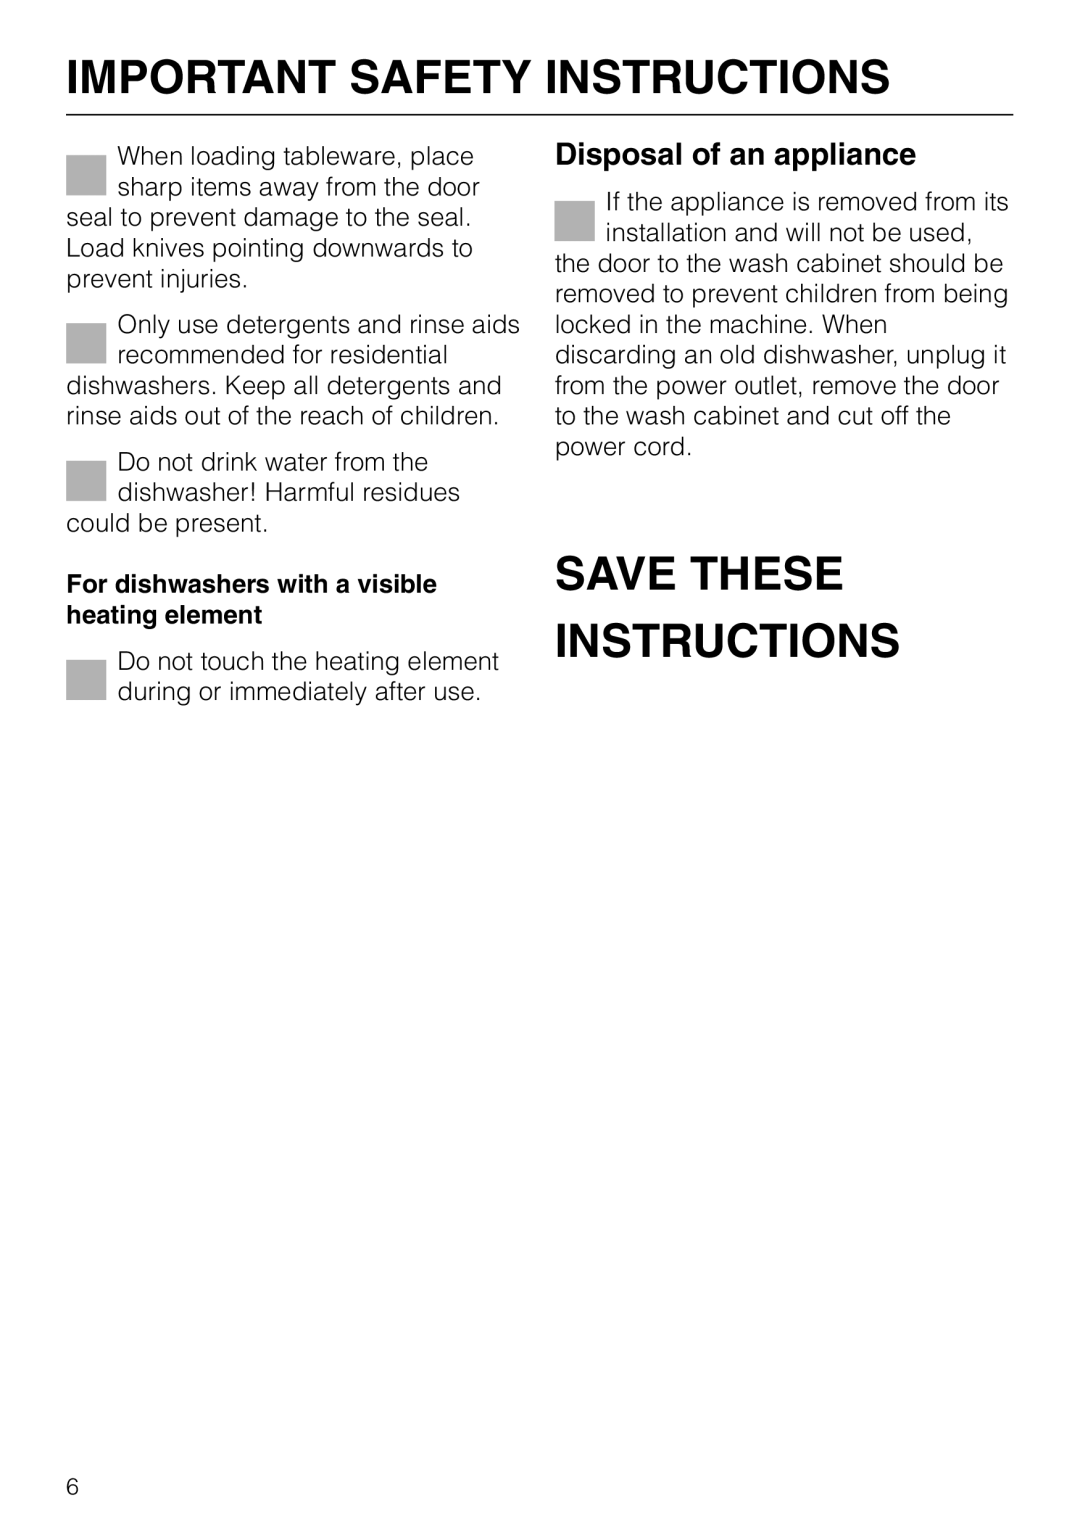 Miele G 851 SC Plus operating instructions Save These Instructions, Disposal of an appliance, Important Safety Instructions 